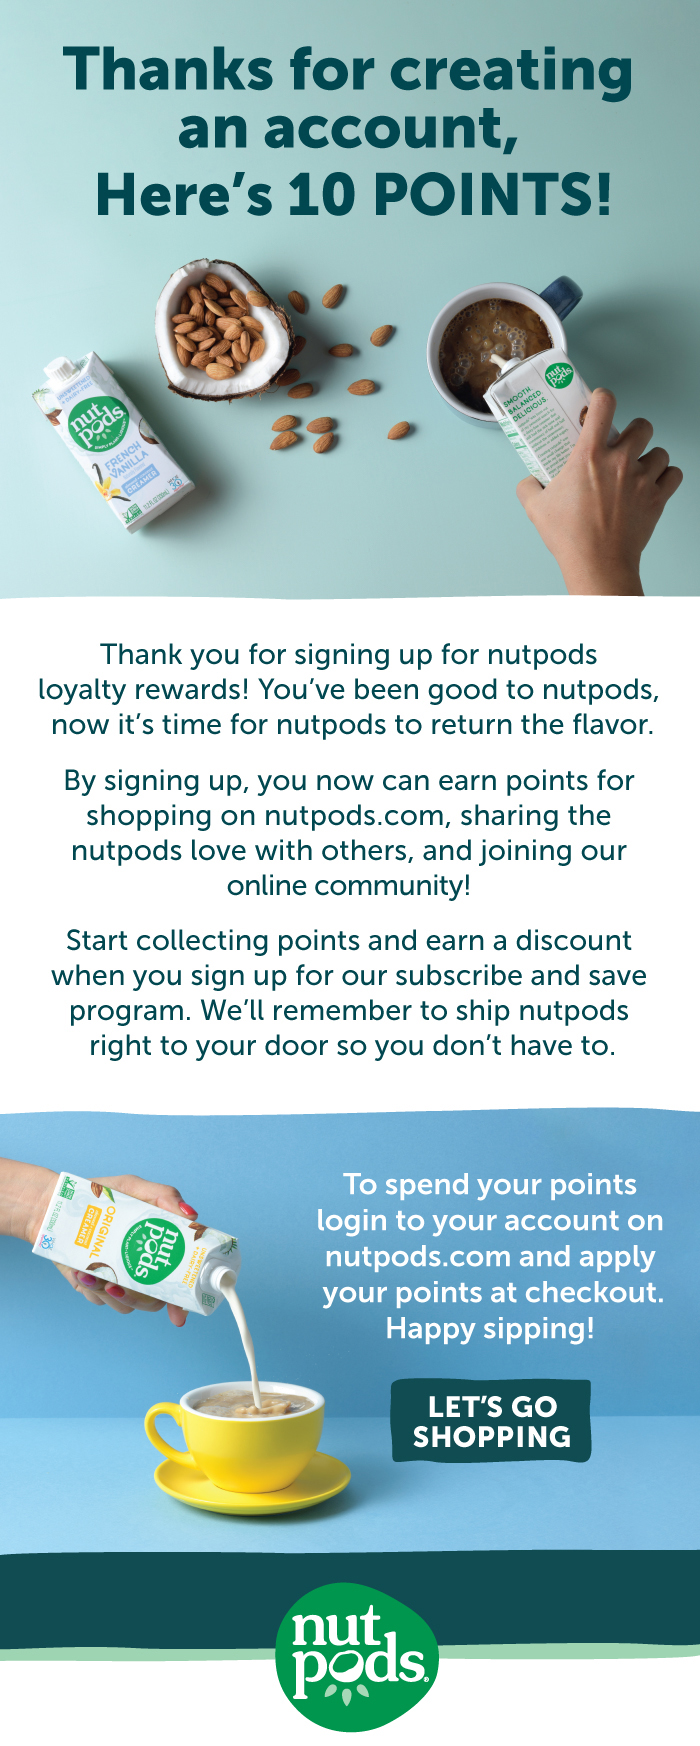 Thank you for signing up for nutpods loyalty rewards!